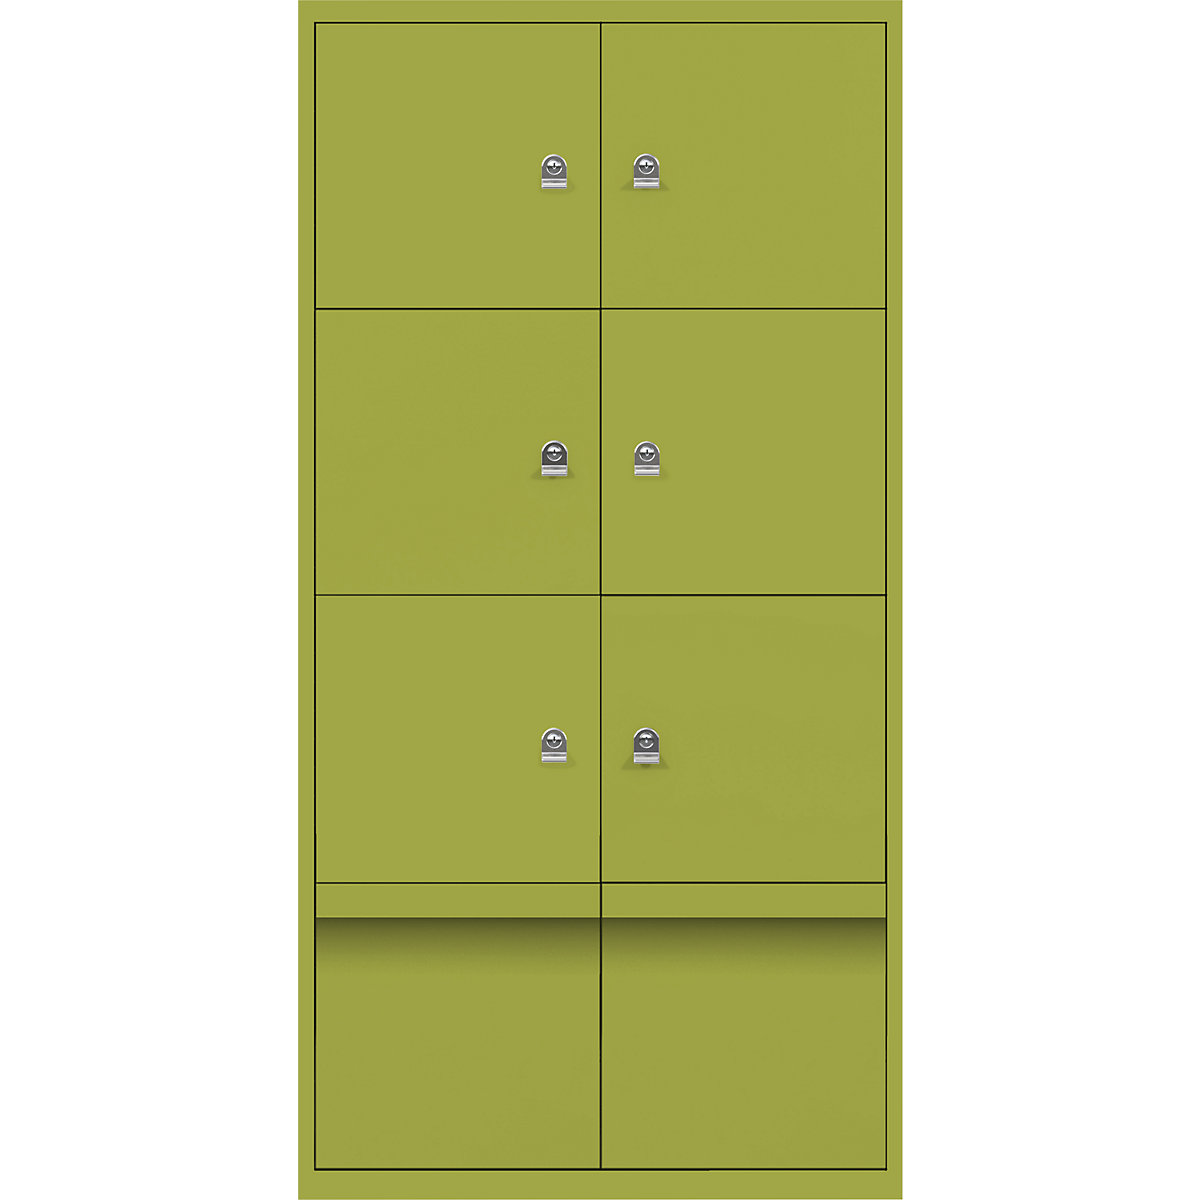 BISLEY – LateralFile™ lodge, with 6 lockable compartments and 2 drawers, height 375 mm each, green